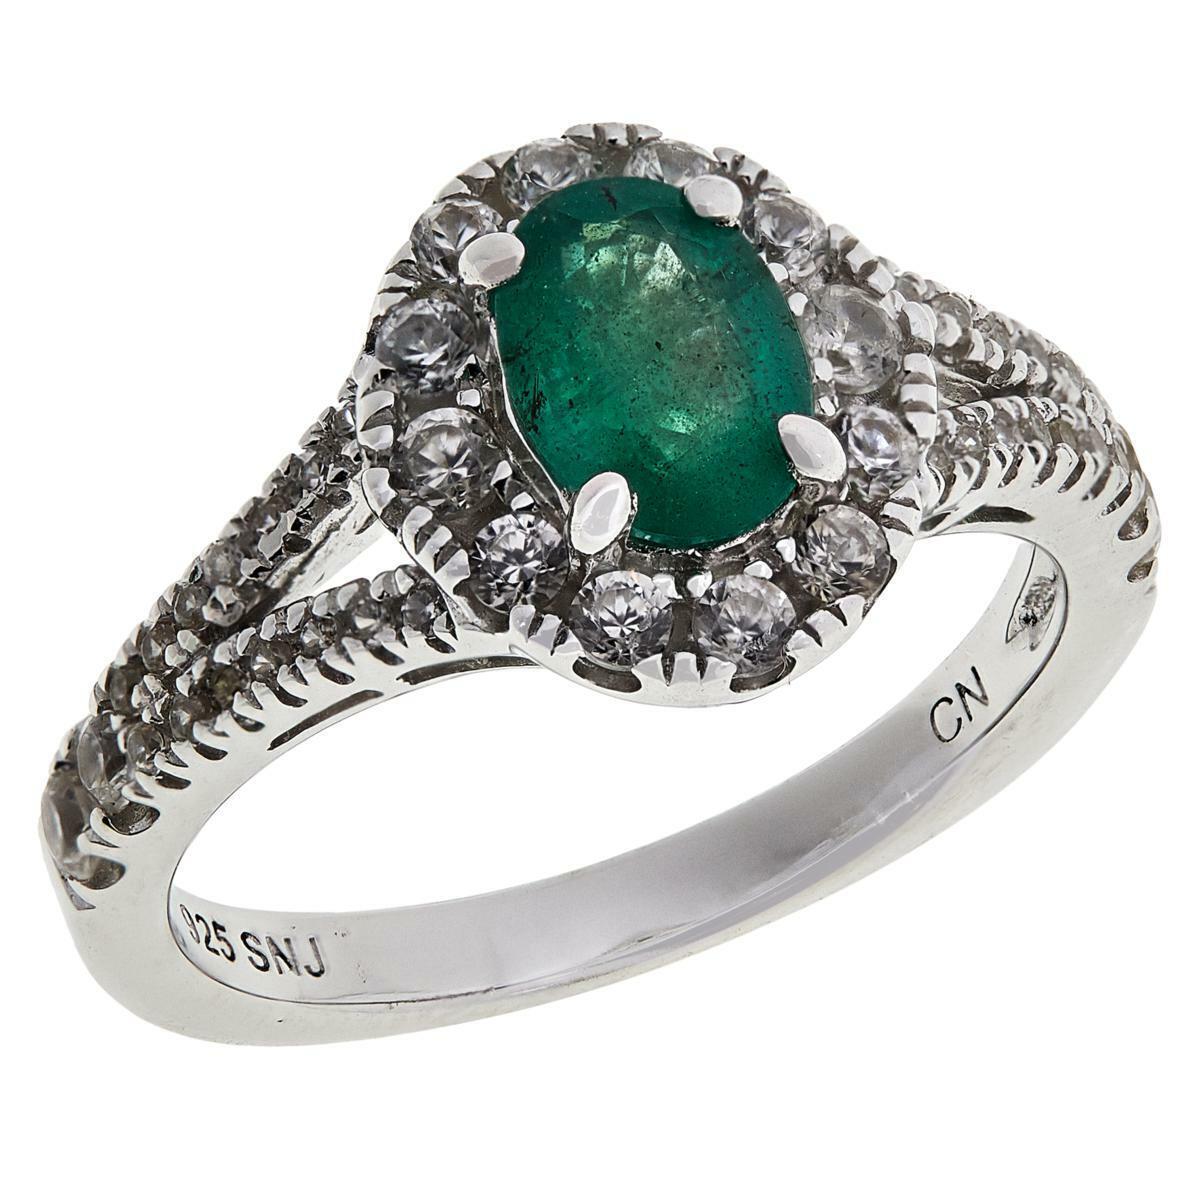 Rarities Sterling Silver Oval Emerald & White Zircon Halo-Design Ring, Size 7